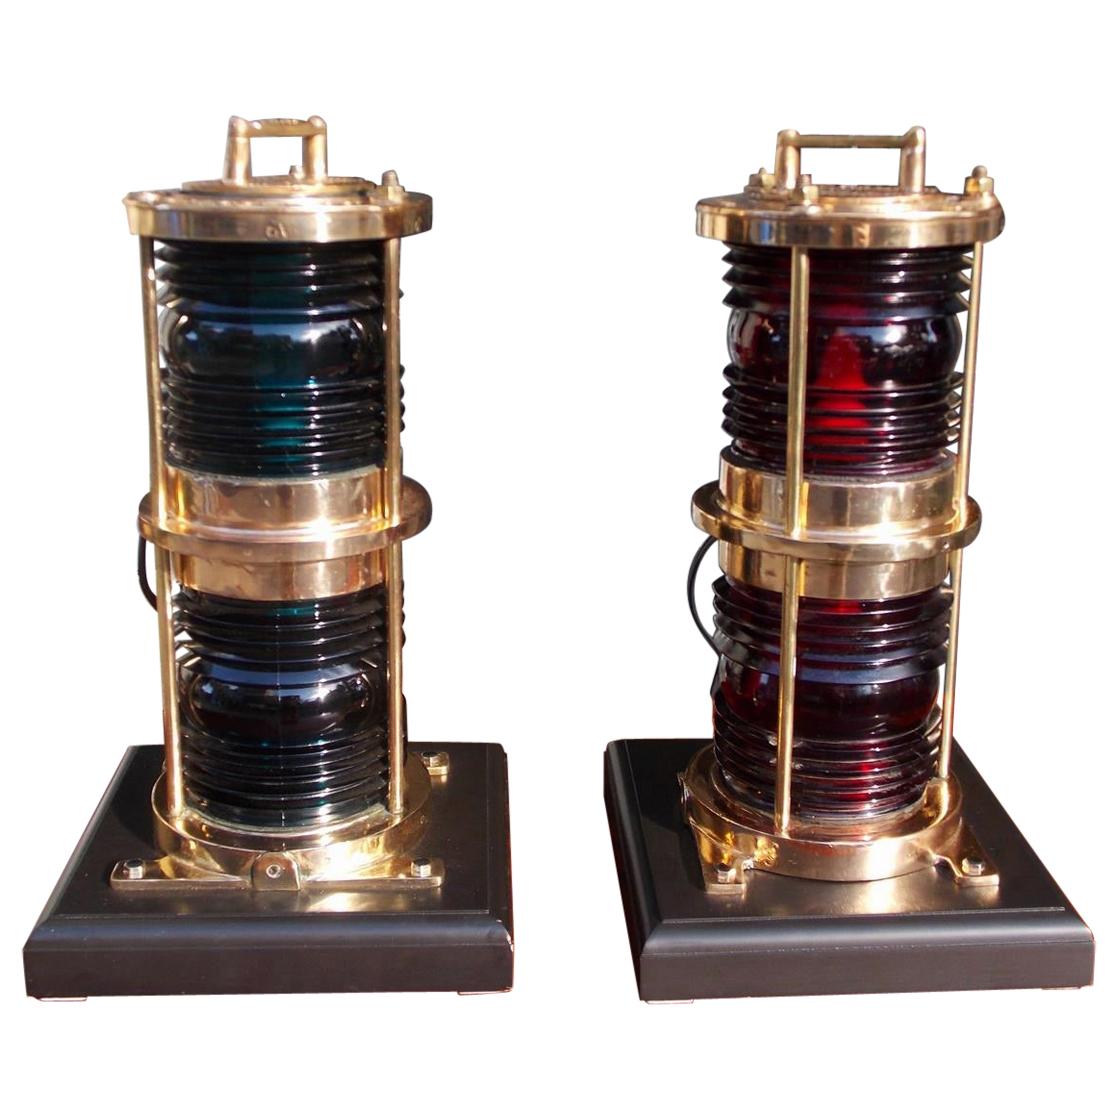 Pair of American Brass Double Stacked Maritime Beacons Mounted on Bases. C. 1880